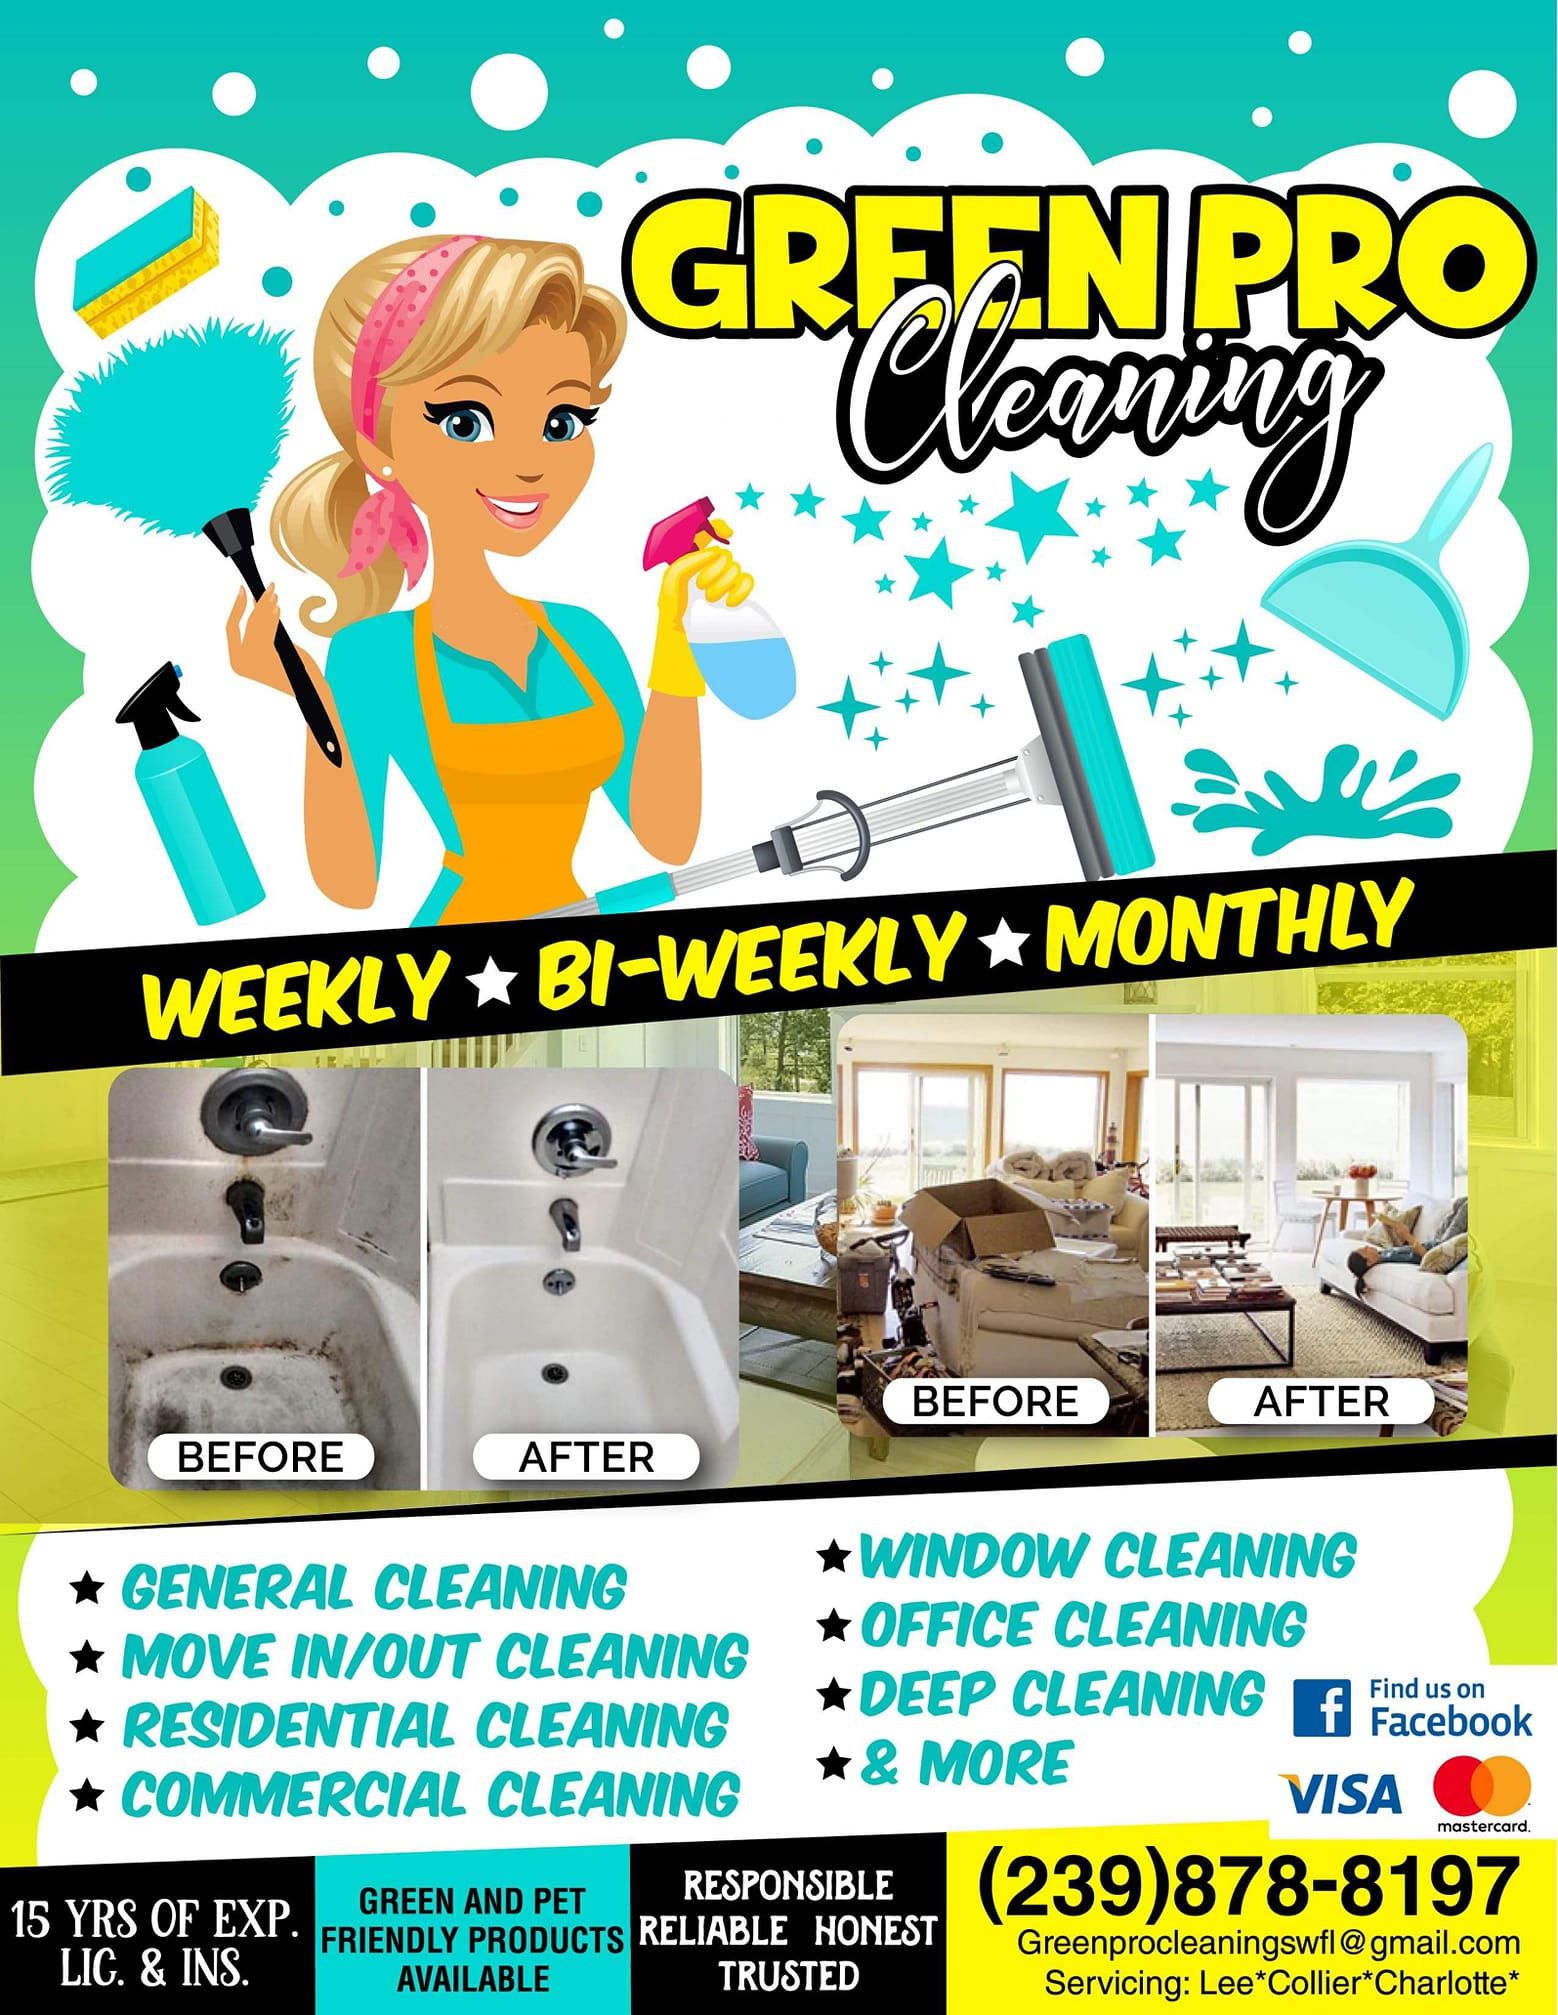 Green Pro Cleaning